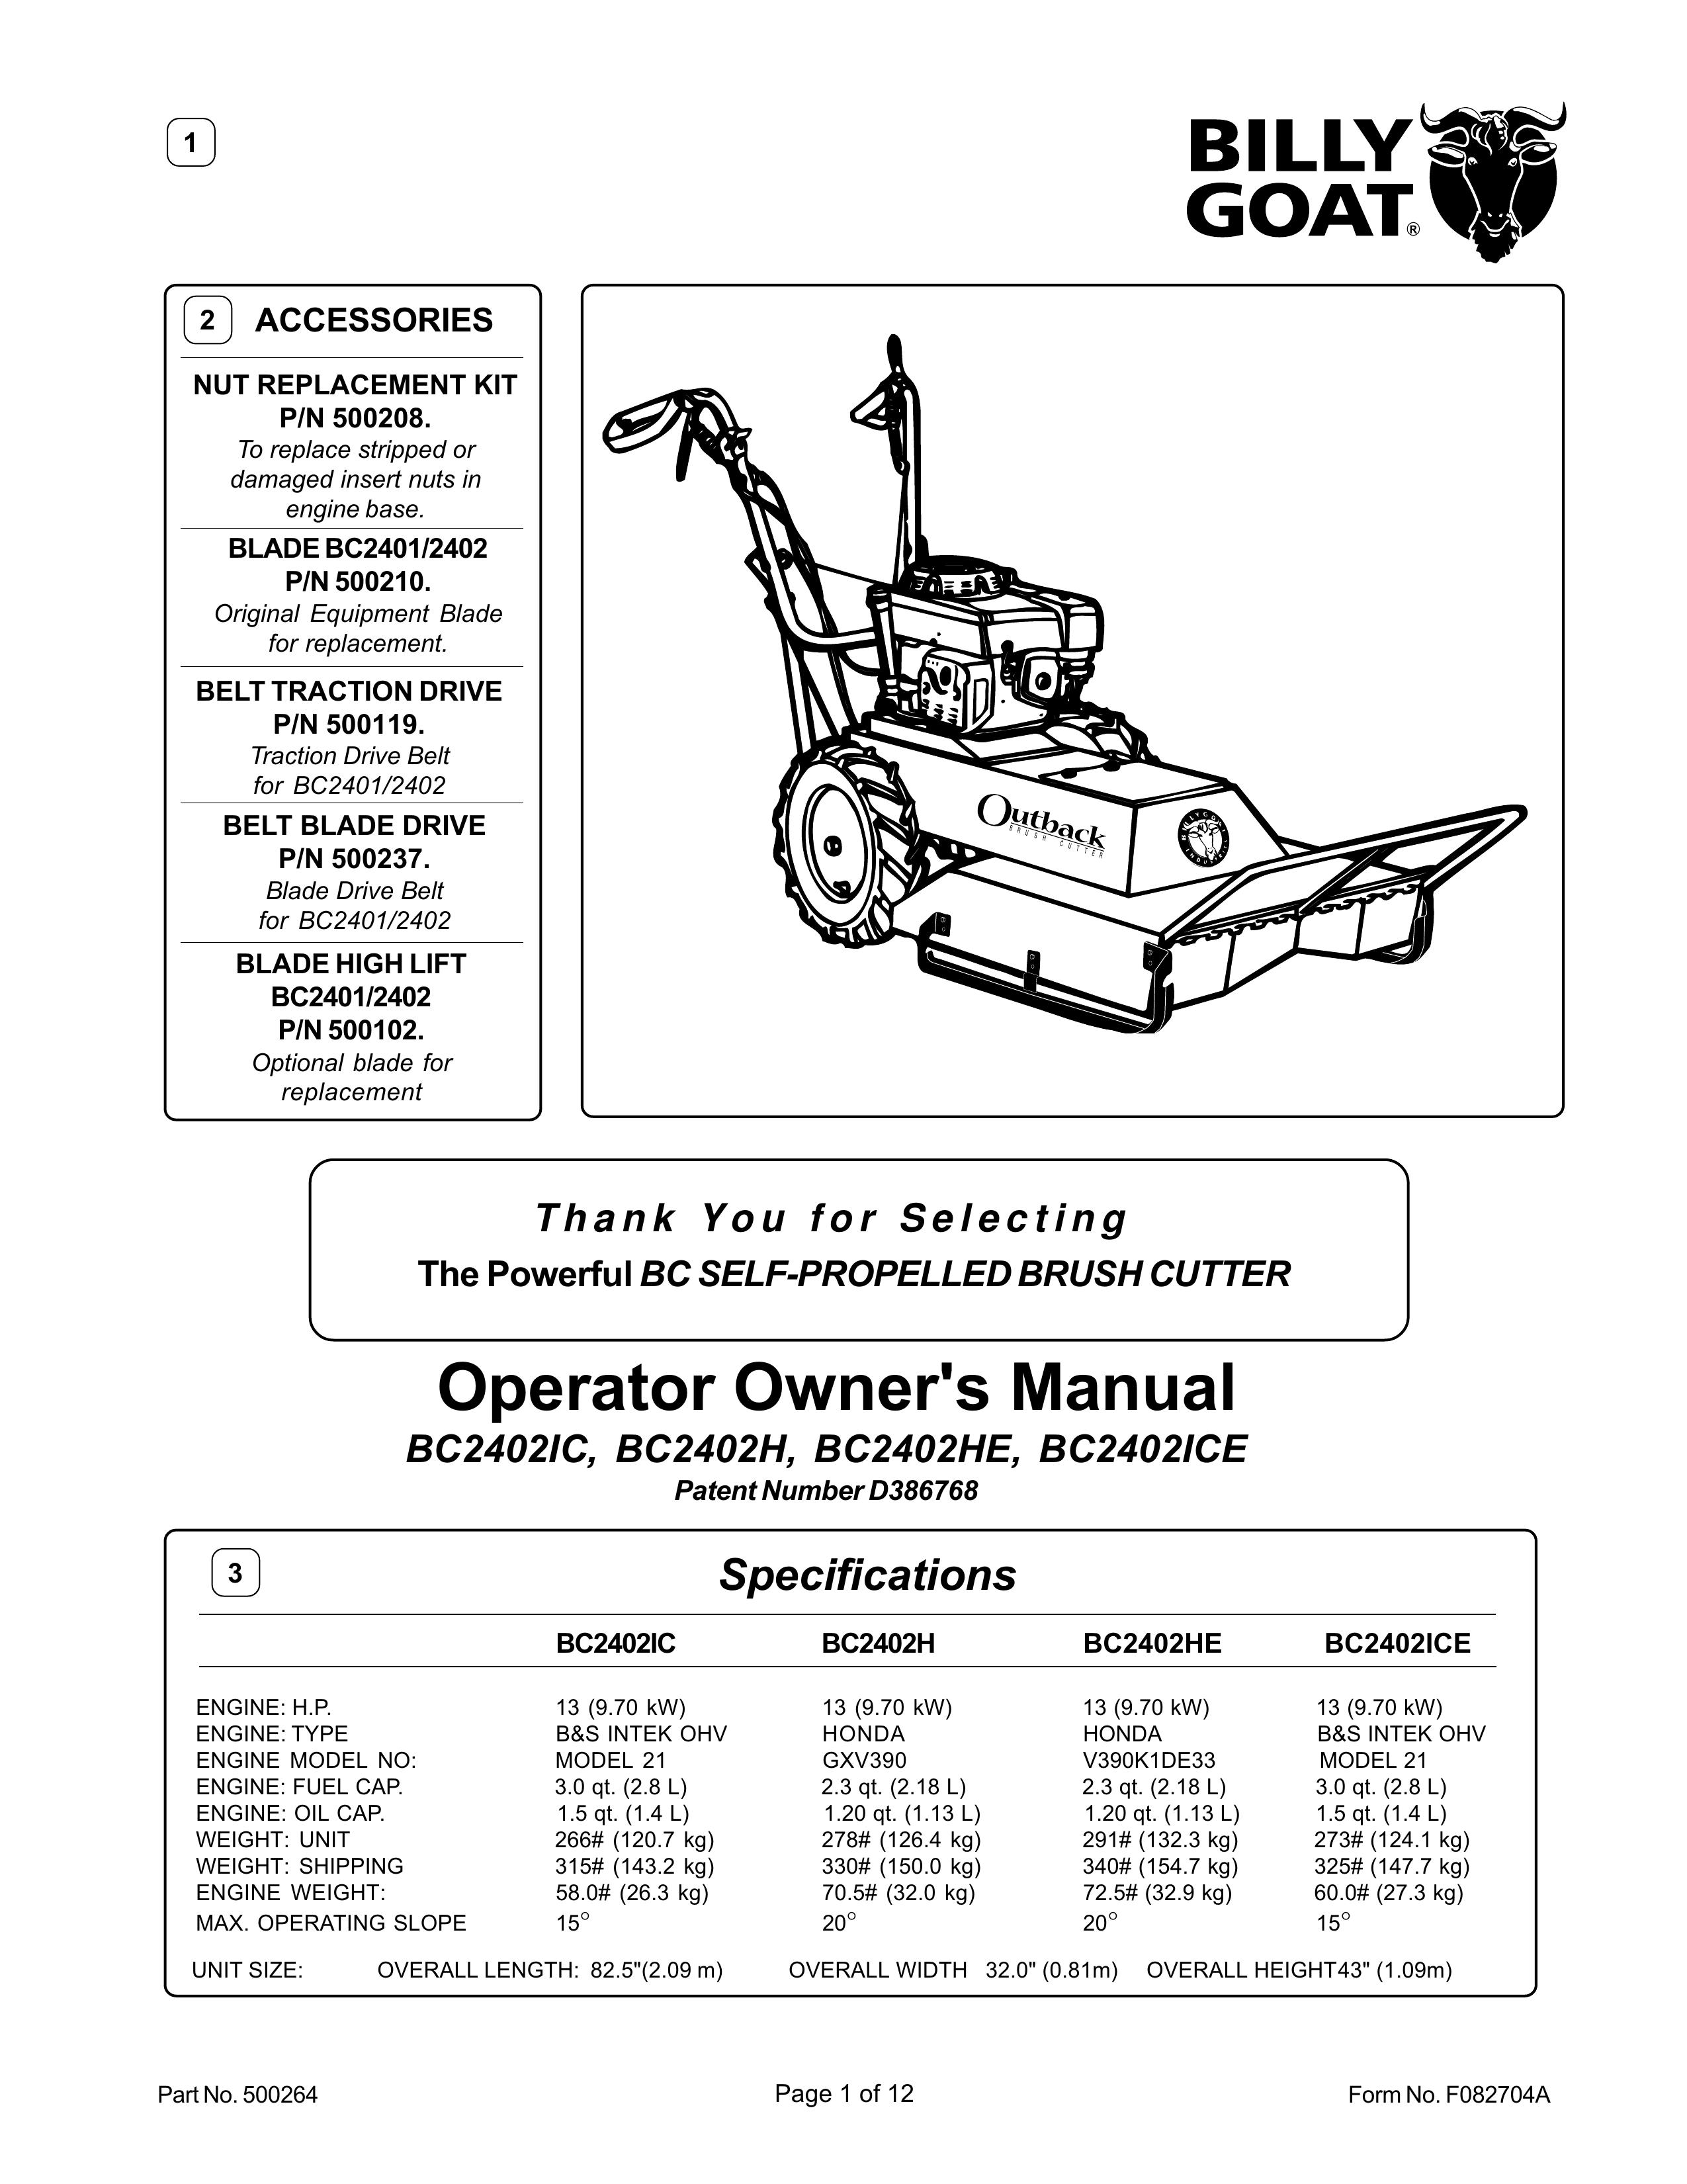 Billy Goat BC2401IC, BC2402H, BC2402HE Brush Cutter User Manual